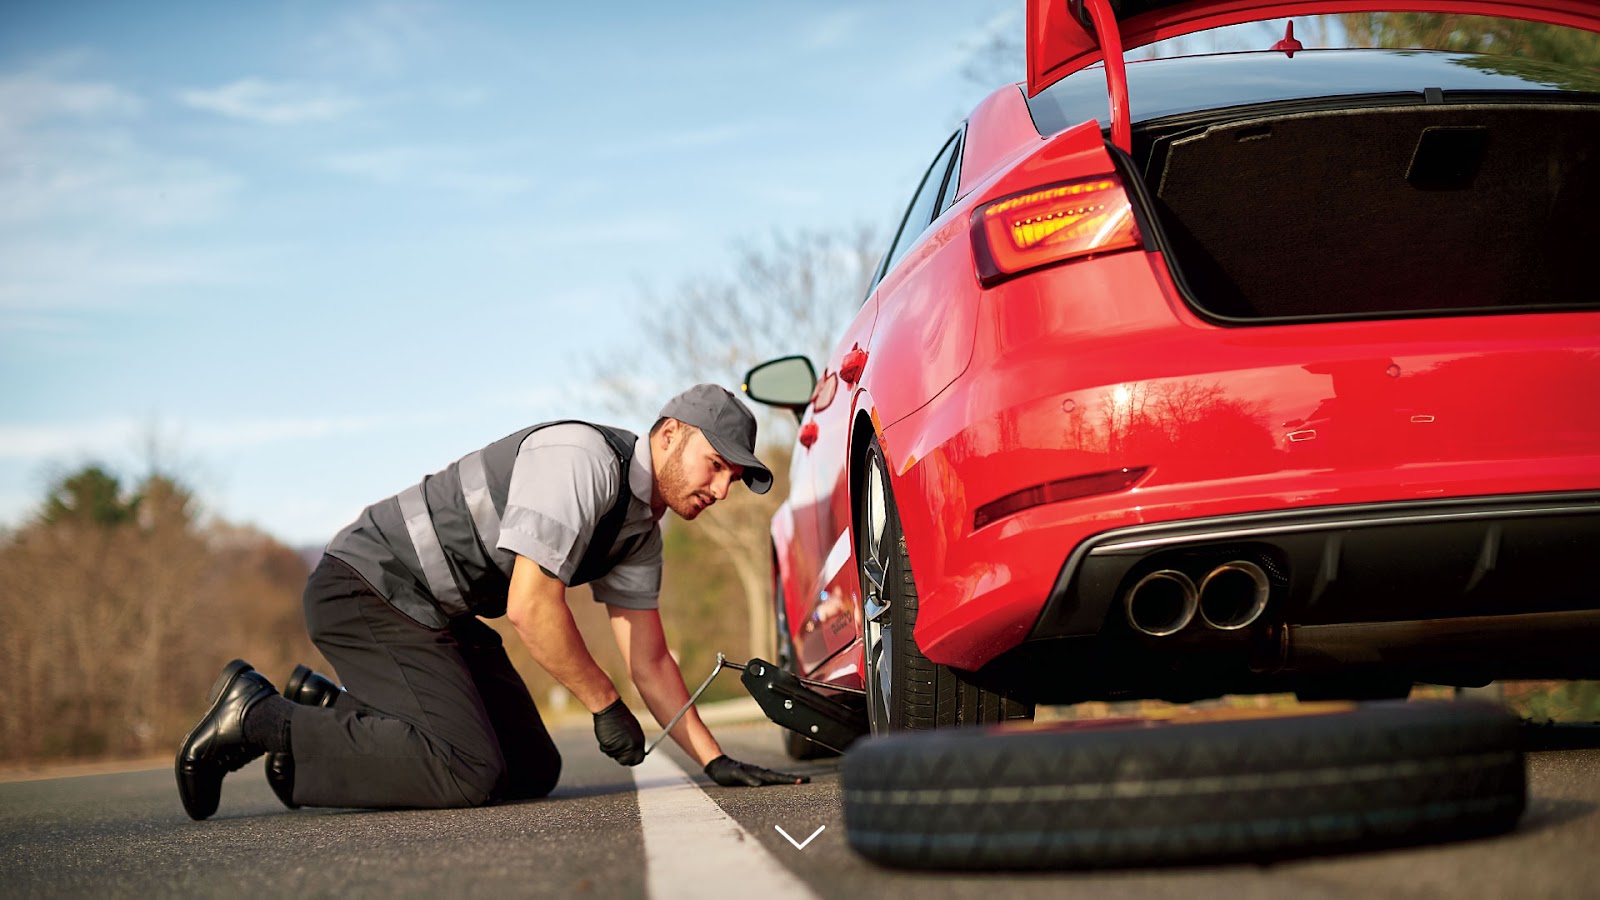 Swift Solutions: Getting Back on Track with Vehicle Roadside Assistance